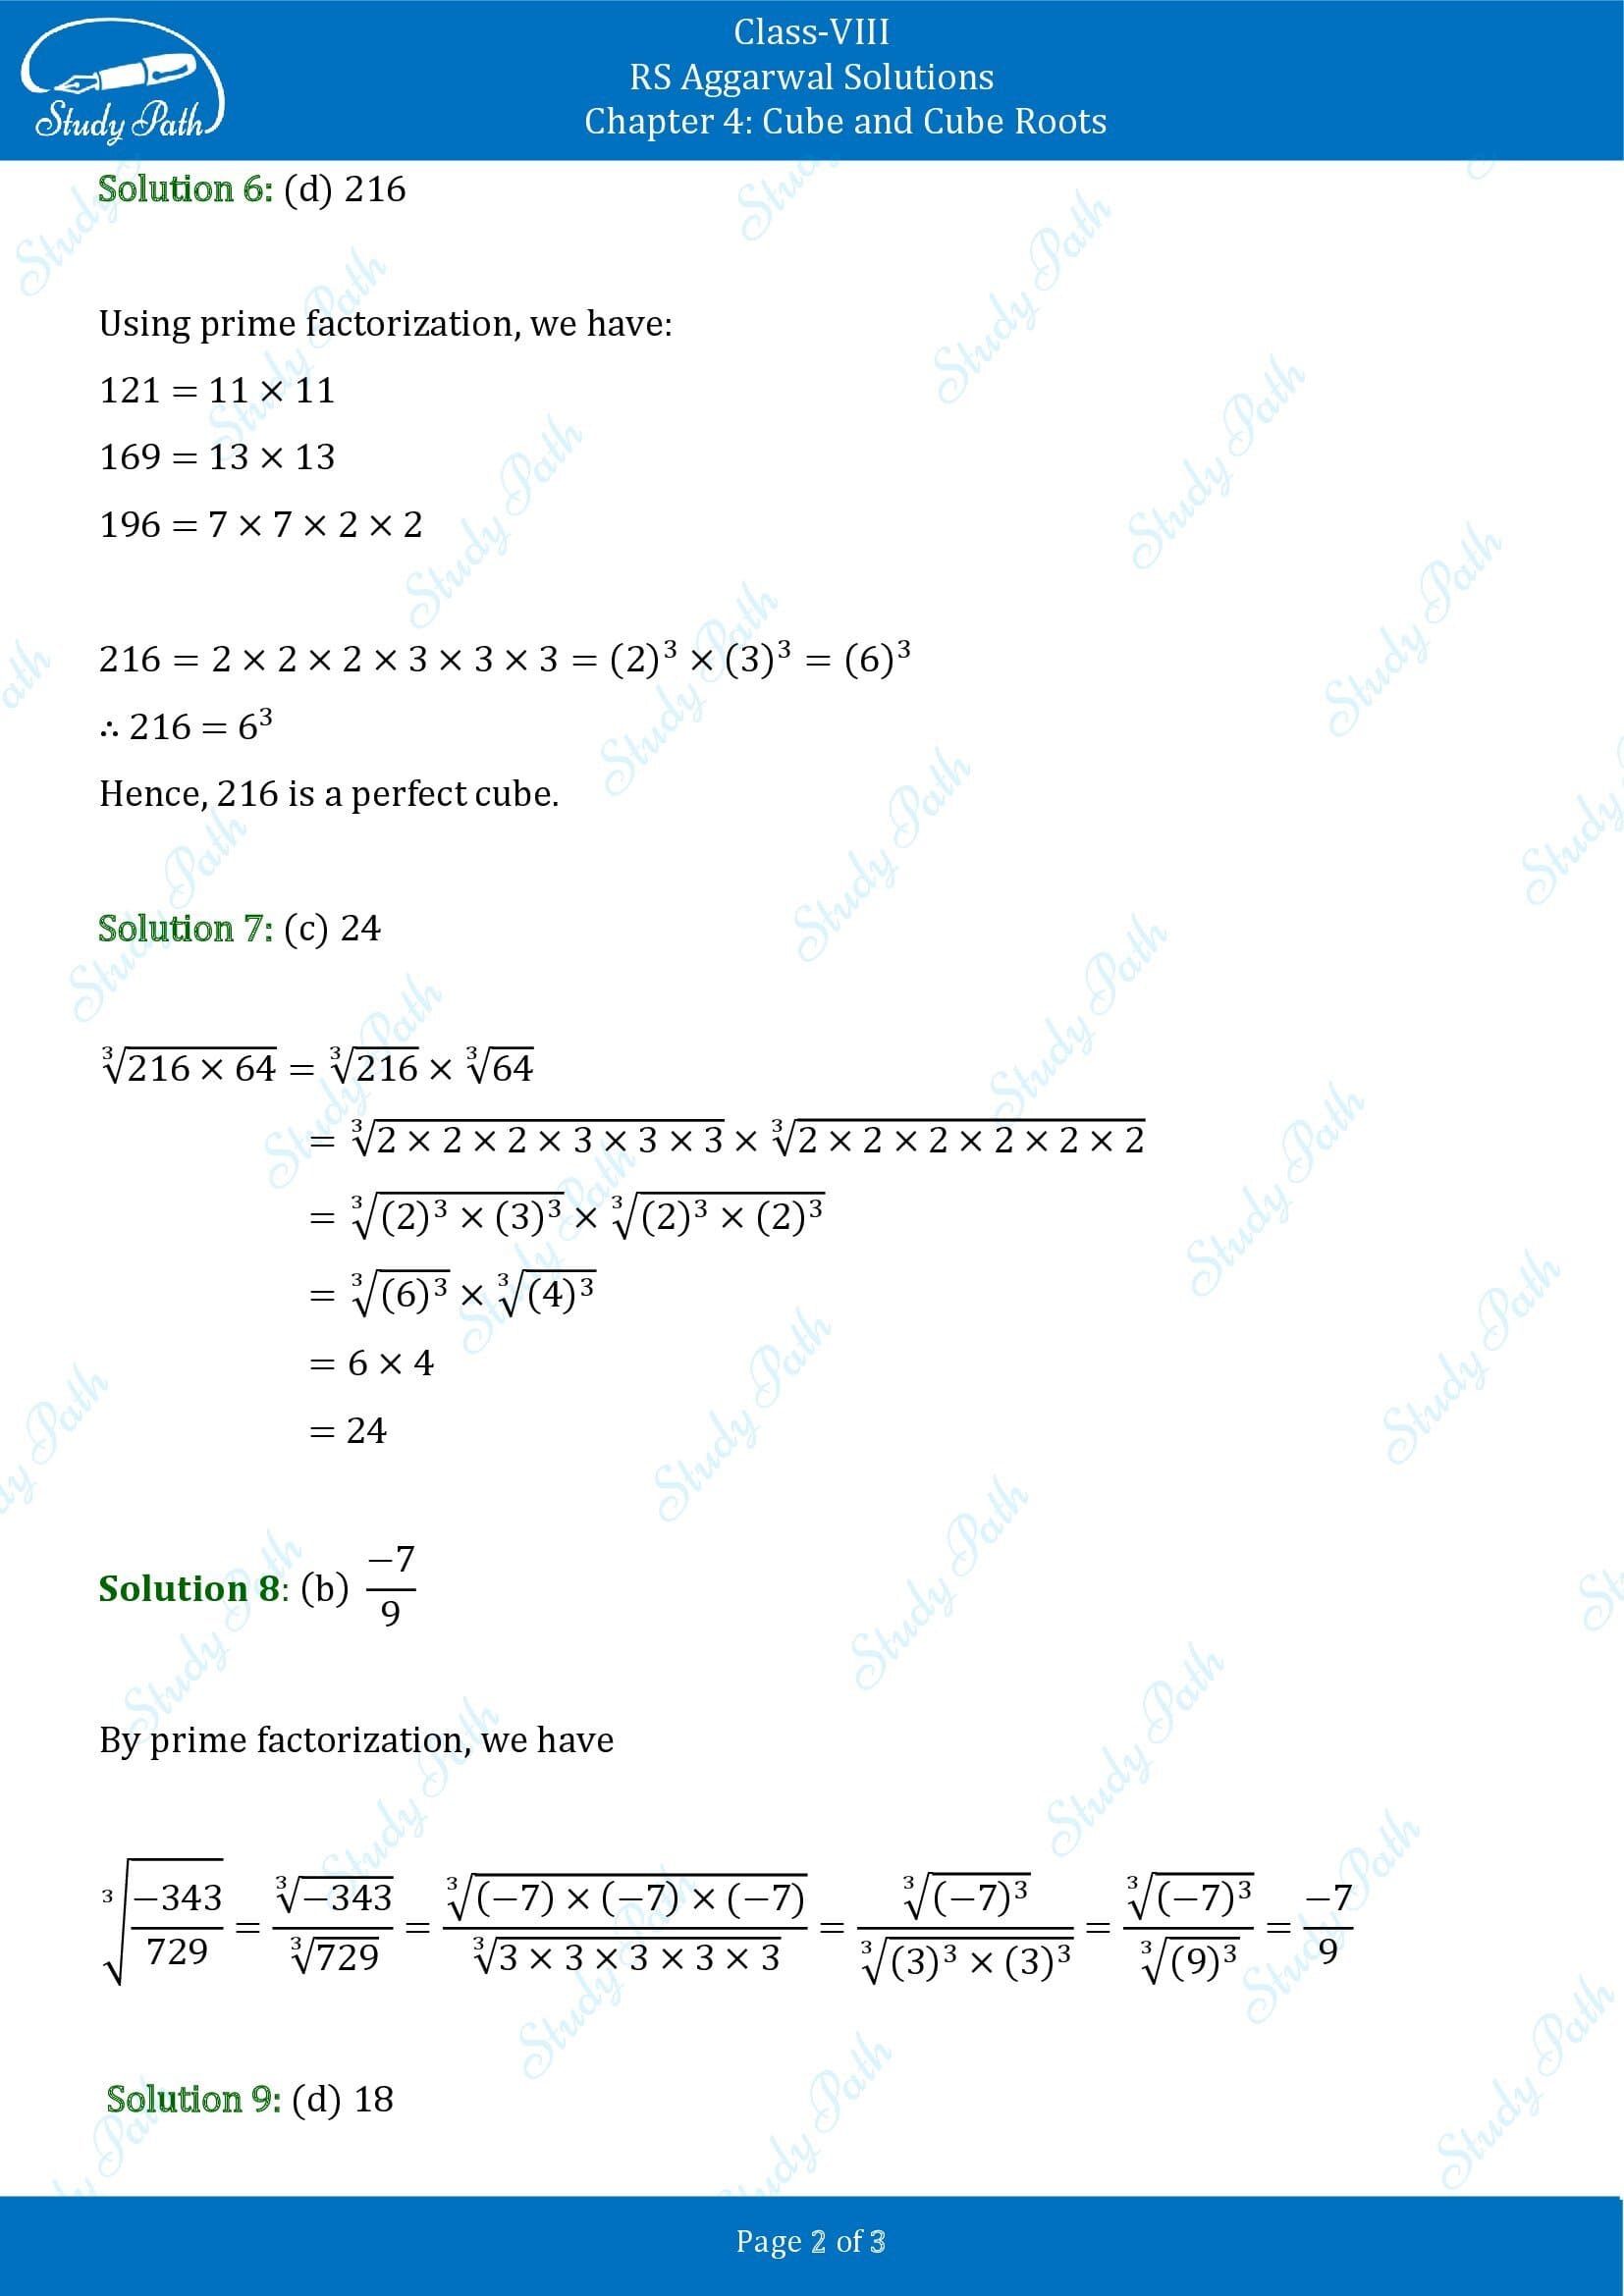 RS Aggarwal Solutions Class 8 Chapter 4 Cube and Cube Roots Test Paper 0002